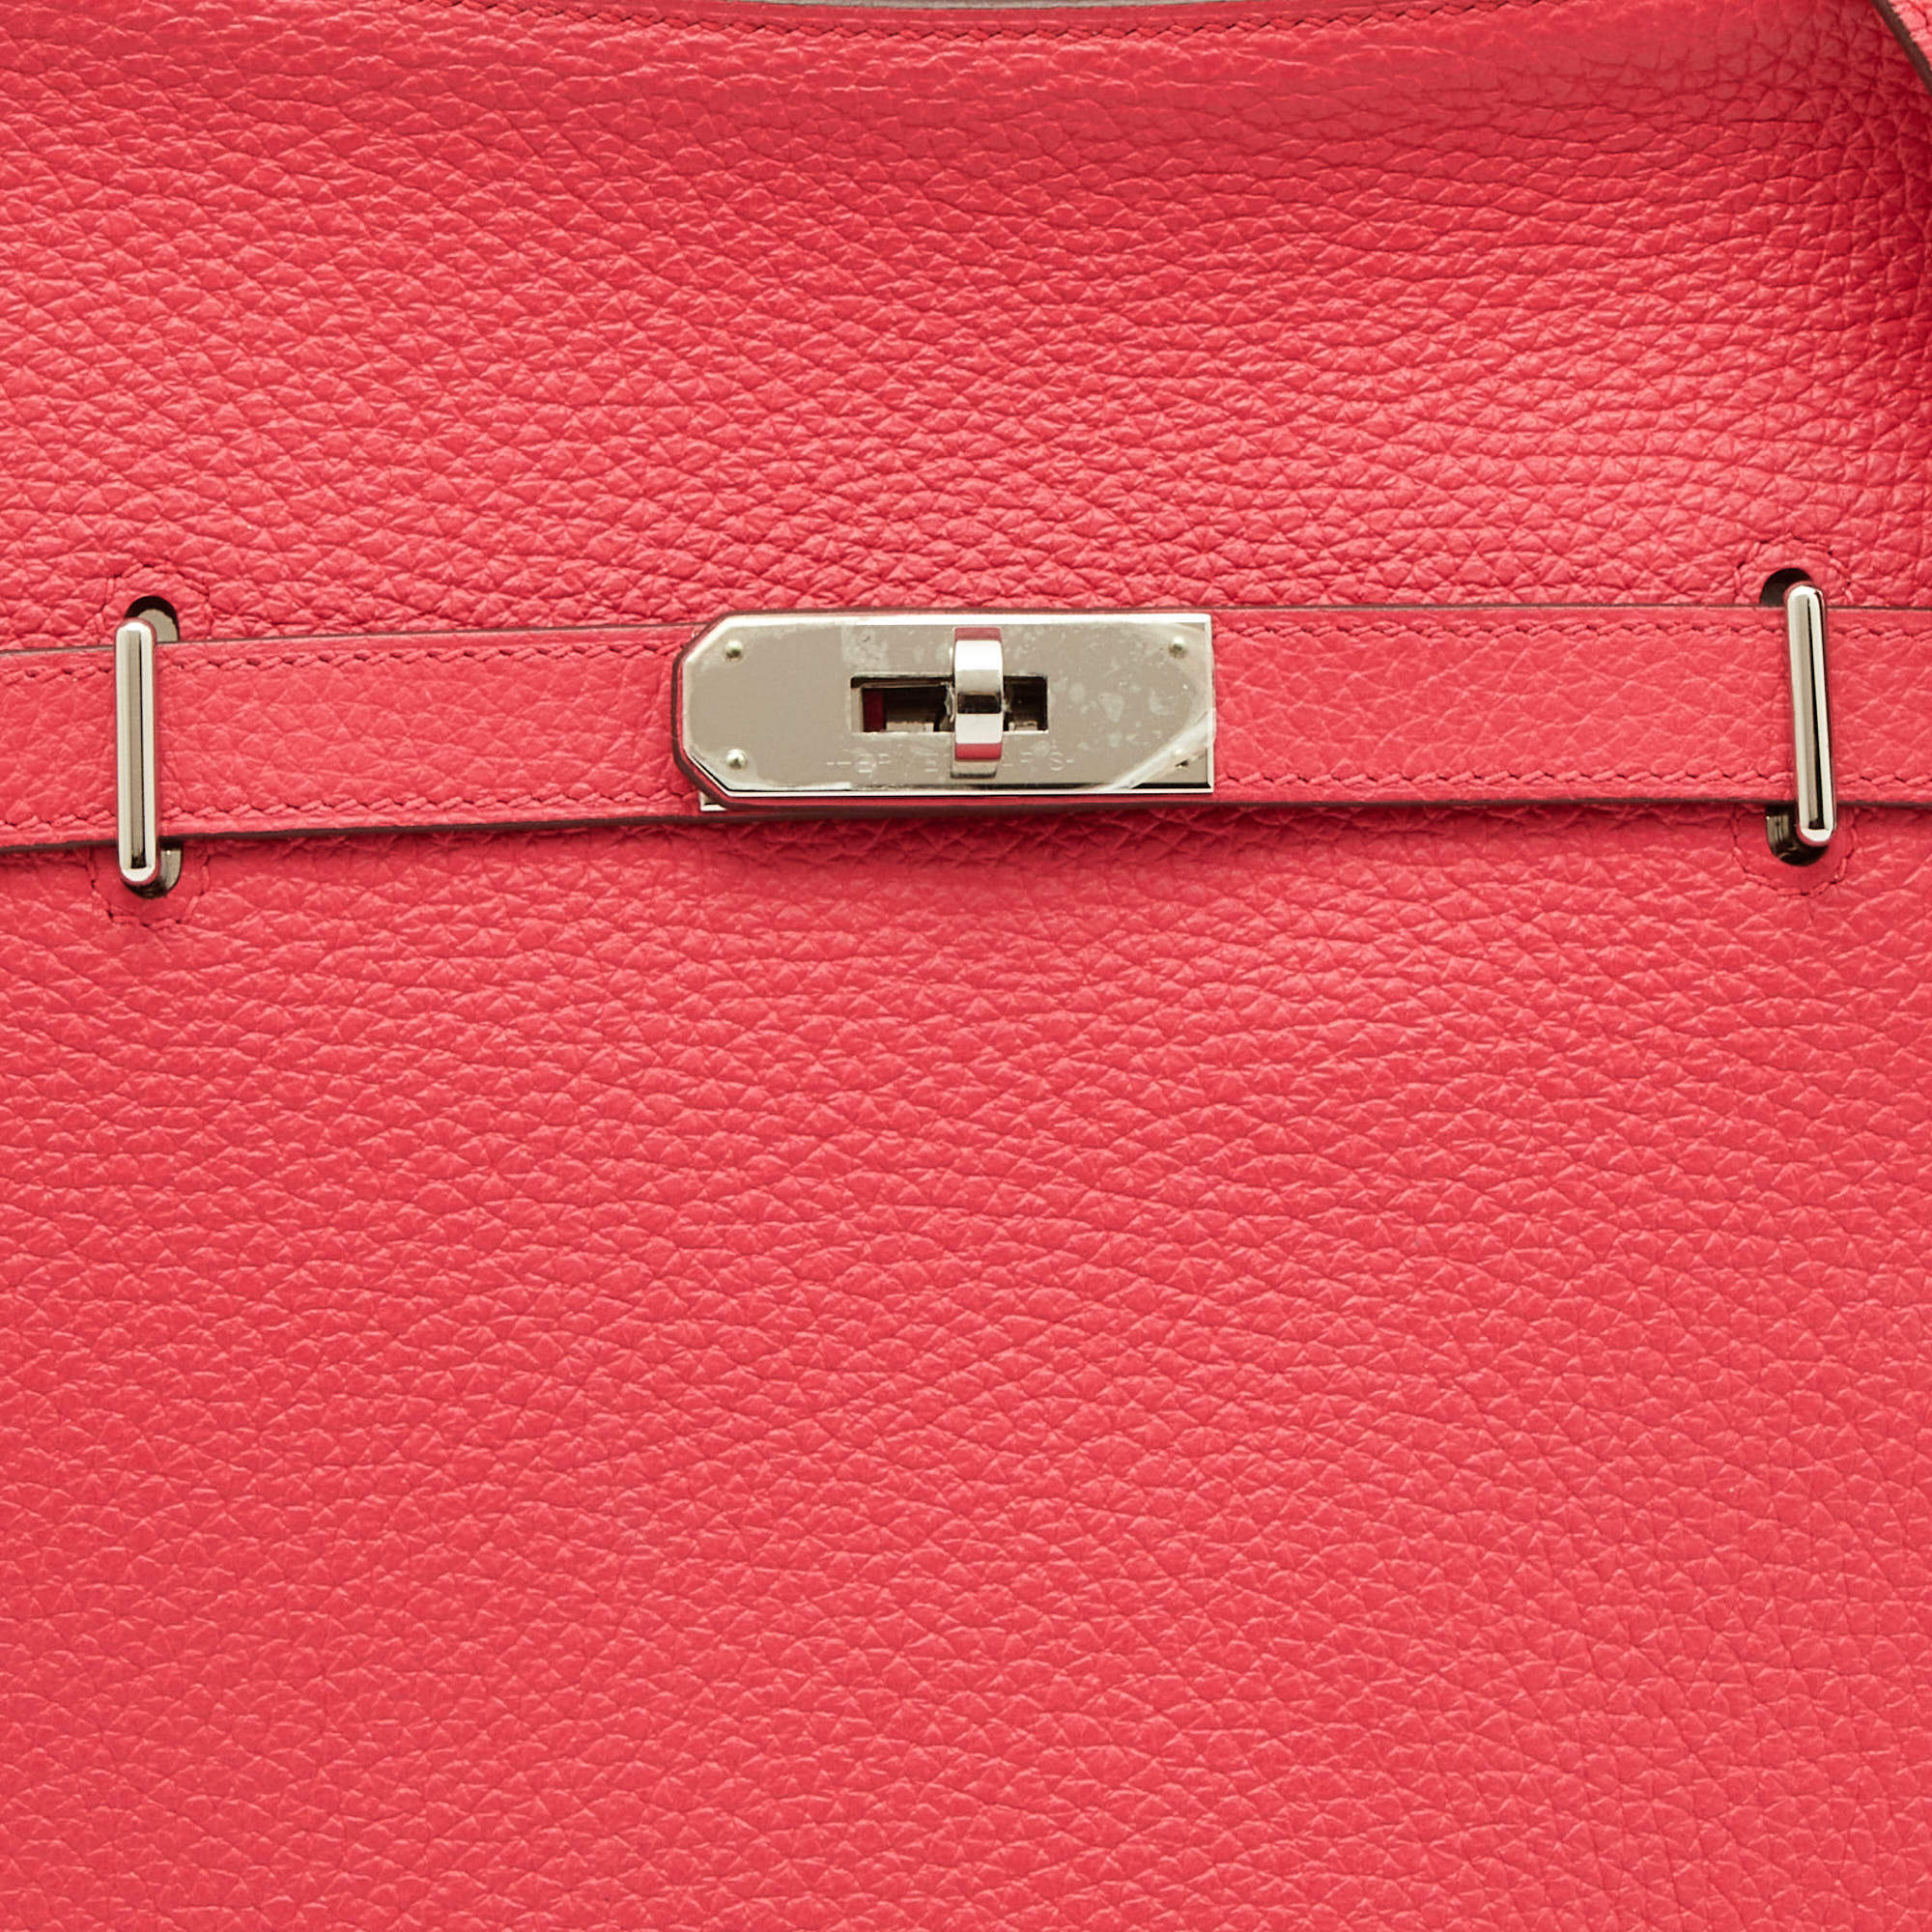 Hermès Halzan 25 In Rouge De Coeur And Rose Extreme Taurillon Clemence  Leather With Palladium Hardware in Pink